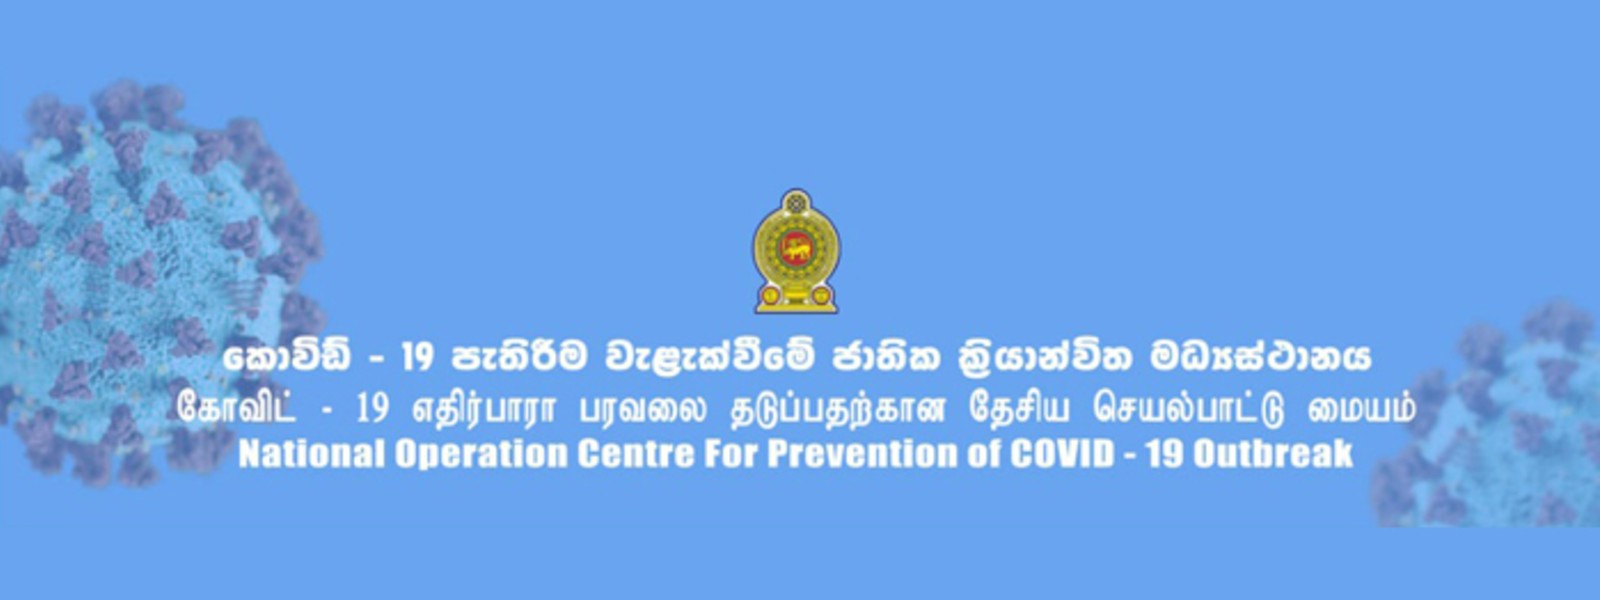 487 people tested positive for COVID-19 on Saturday (28)